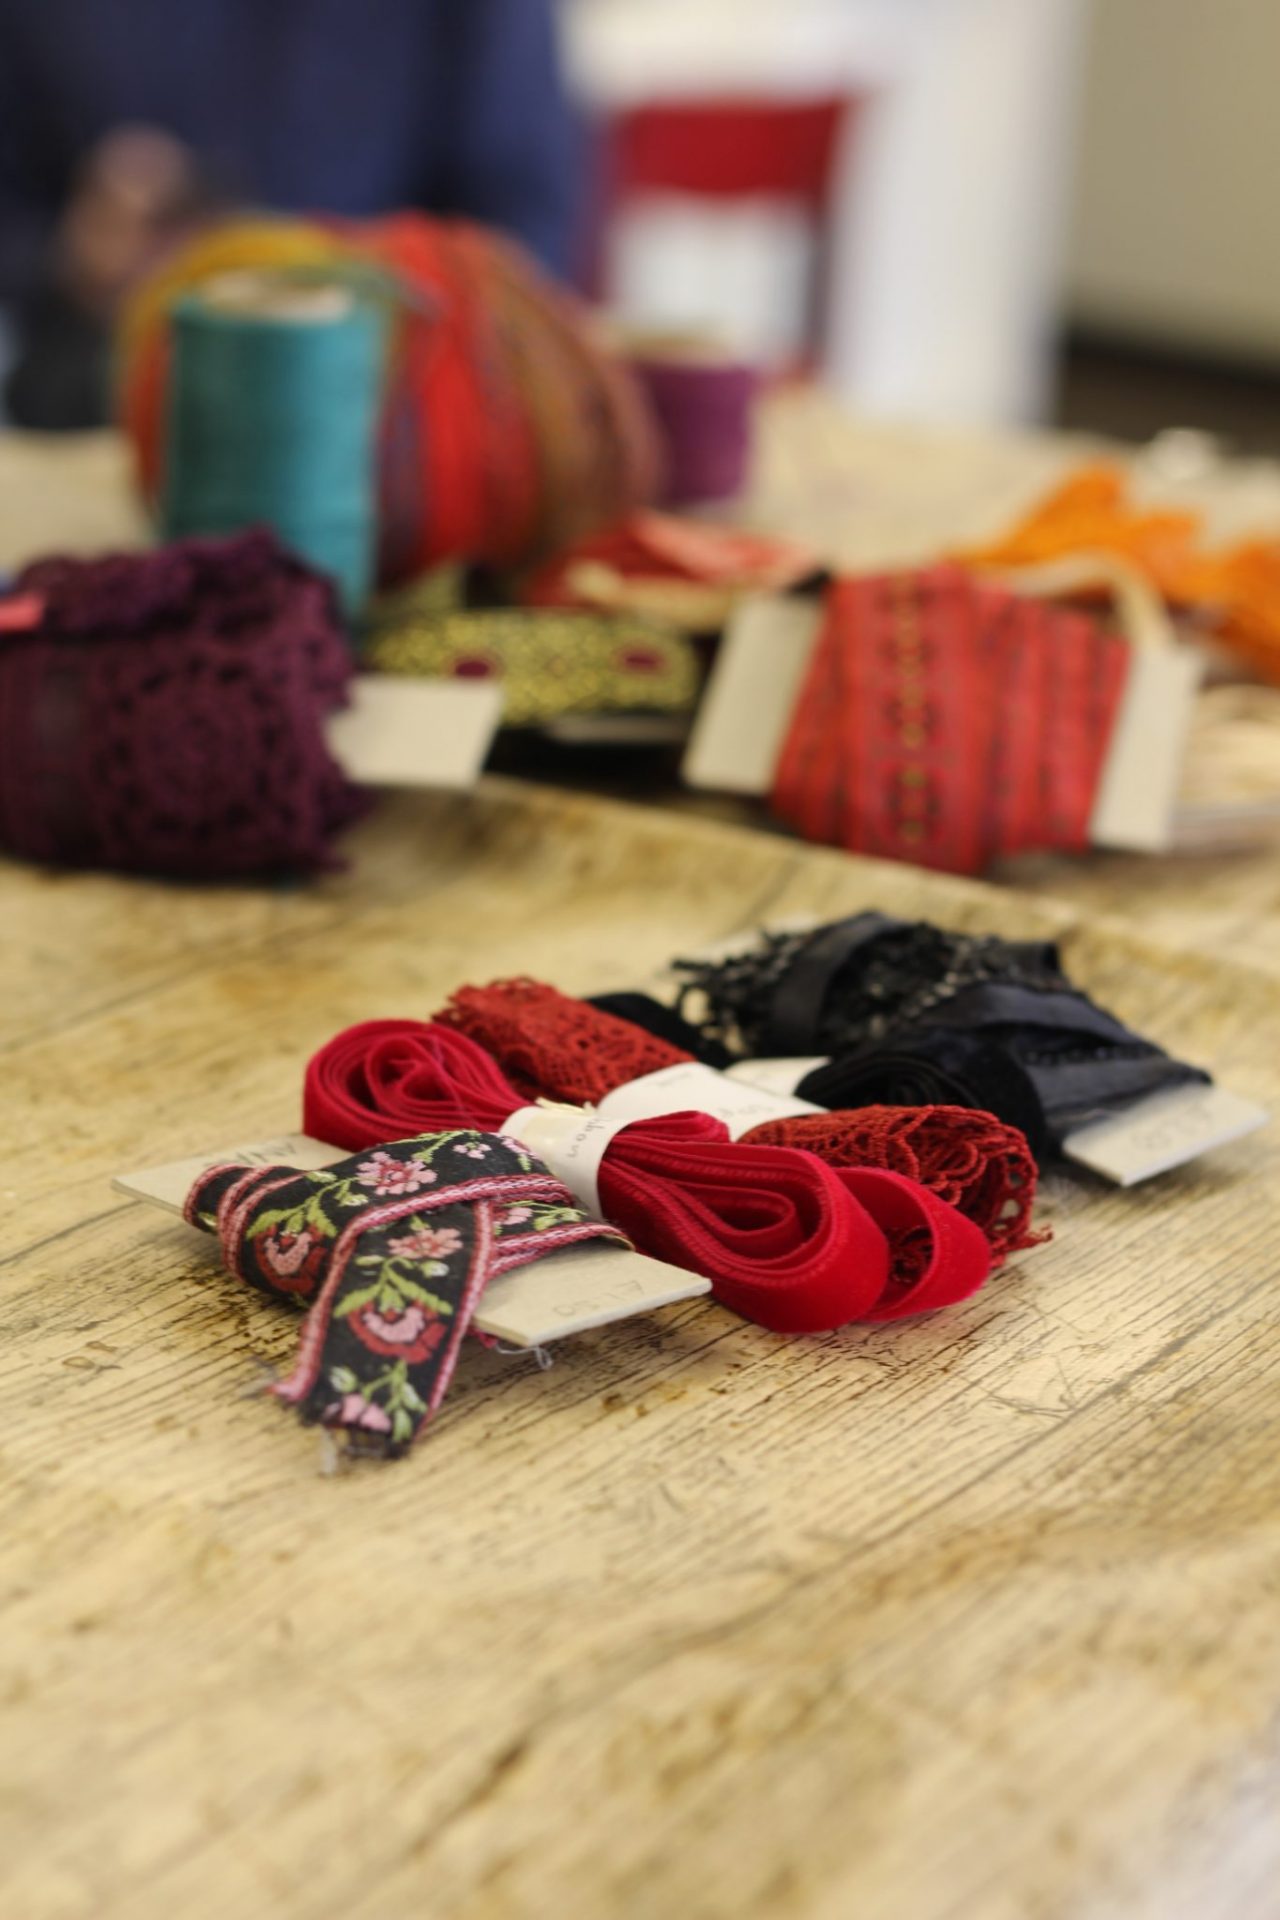 Learn to Patchwork Intermediate One Day Course Leeds City Centre, Learn traditional hand sewn patchwork techniques on this workshop